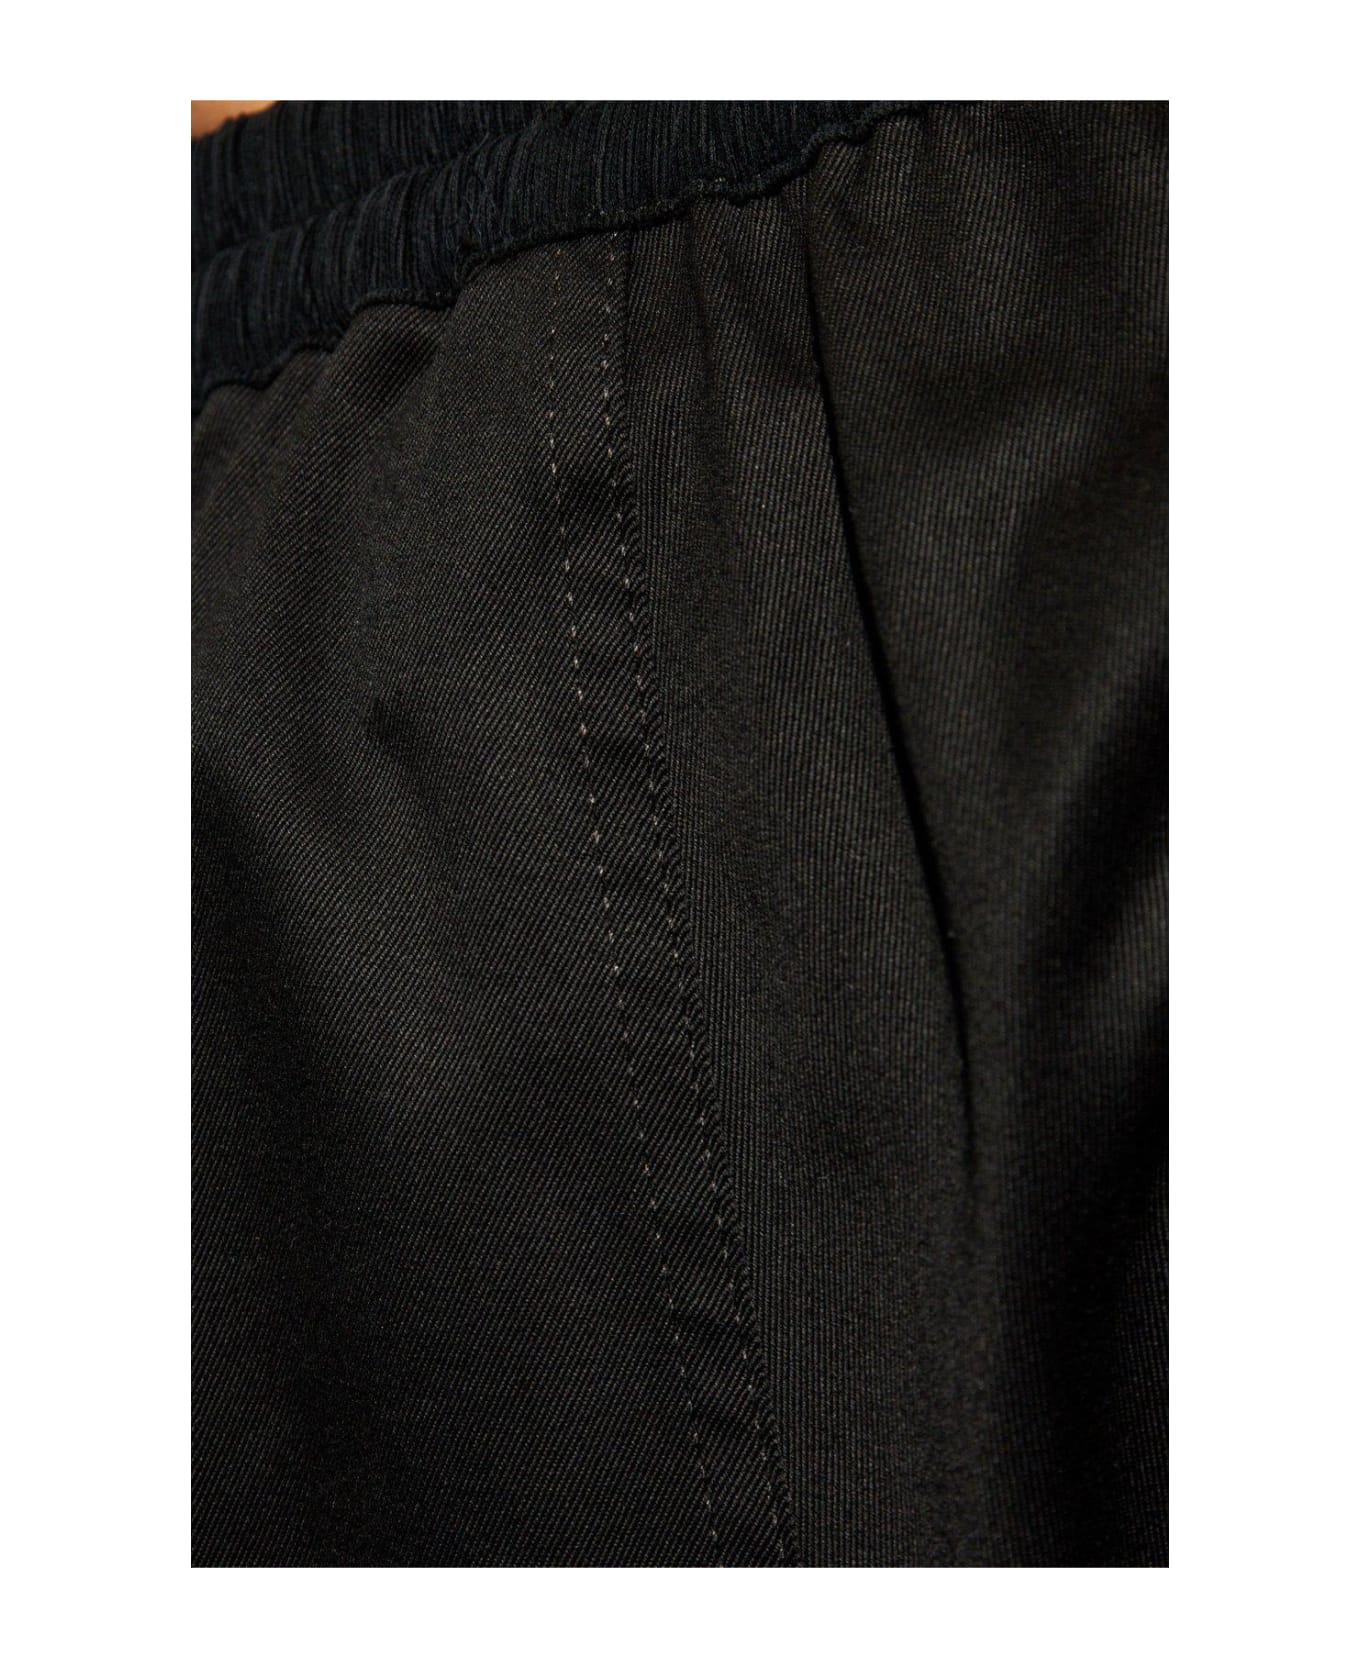 Maison Margiela Pleated Loose-fit Cropped Pants - Black ボトムス